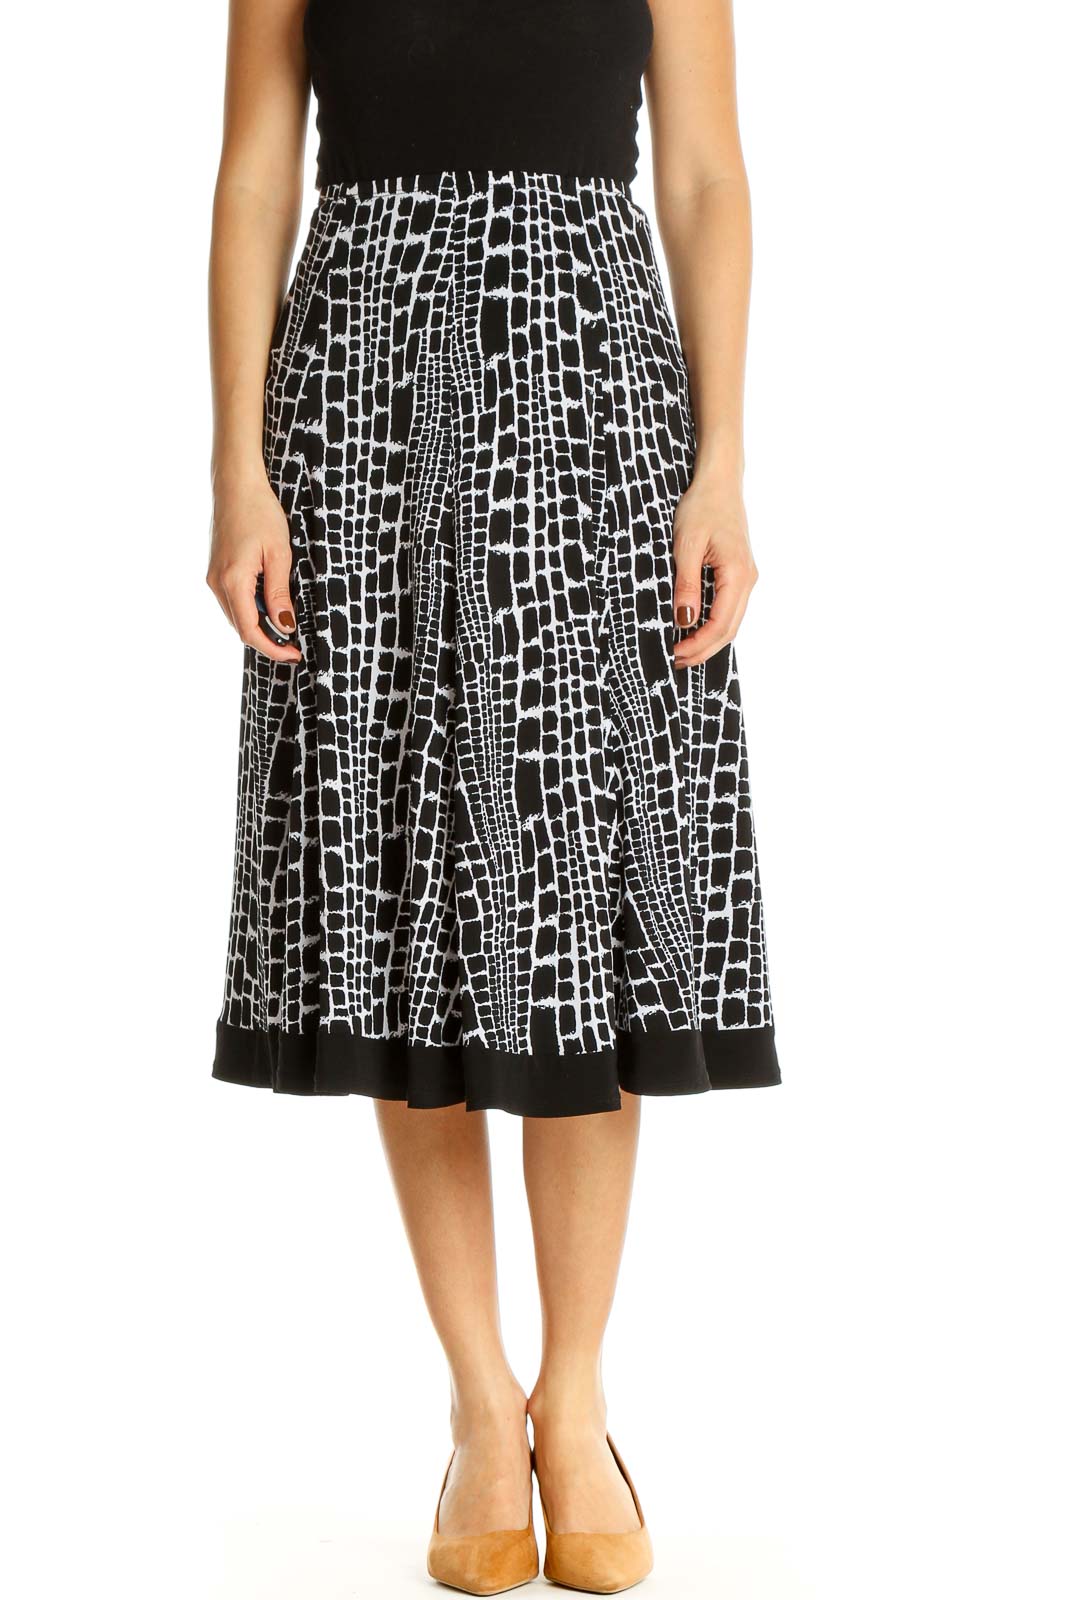 White Printed Brunch A-Line Skirt Front